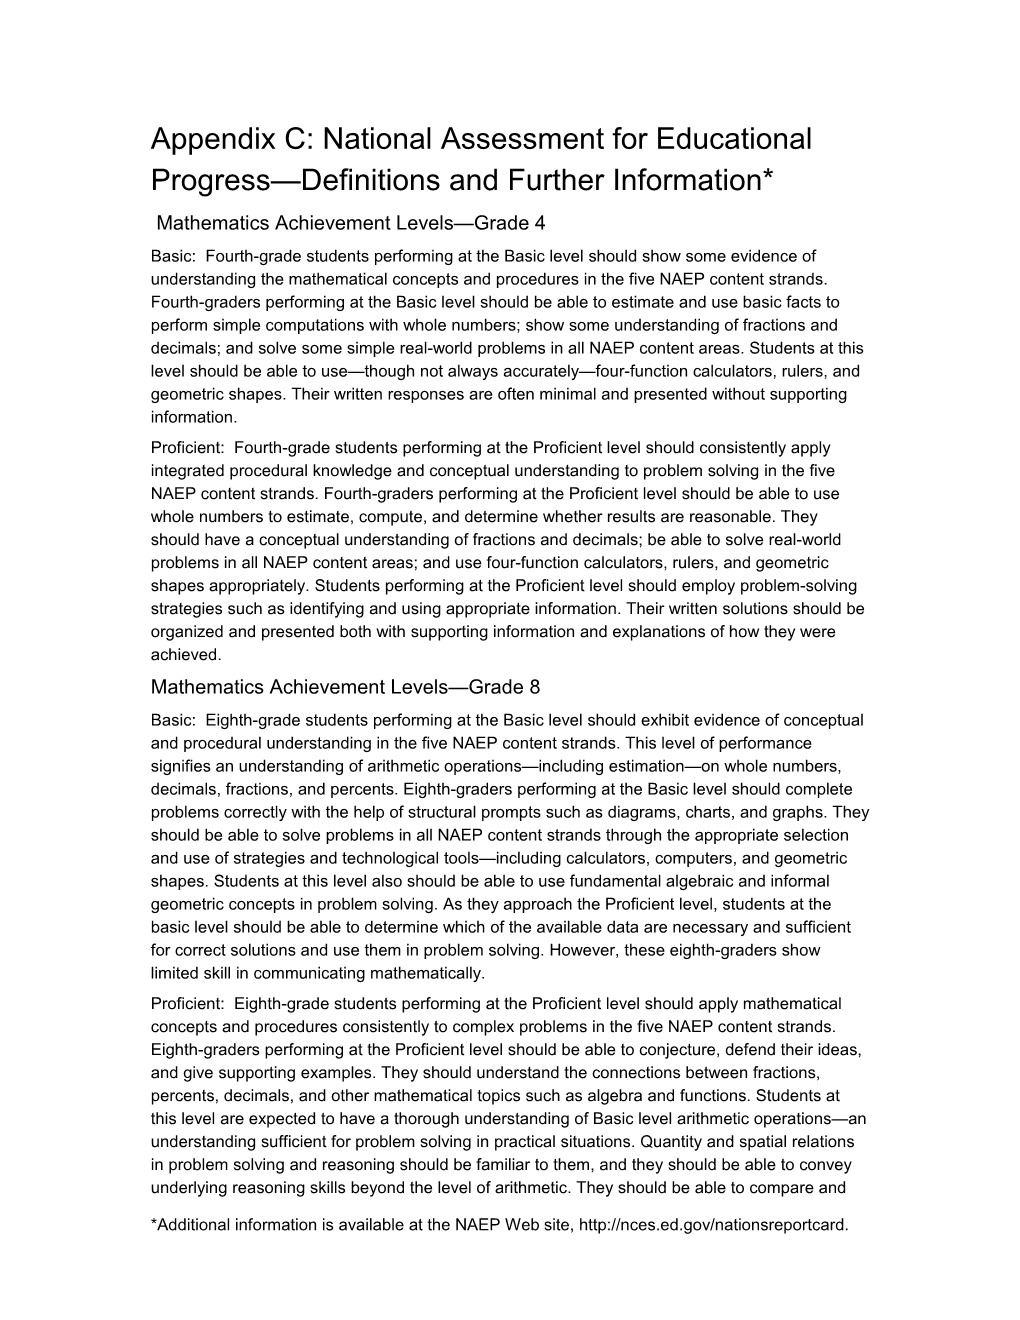 Appendix C: National Assessment for Educational Progress Definitions and Further Information*